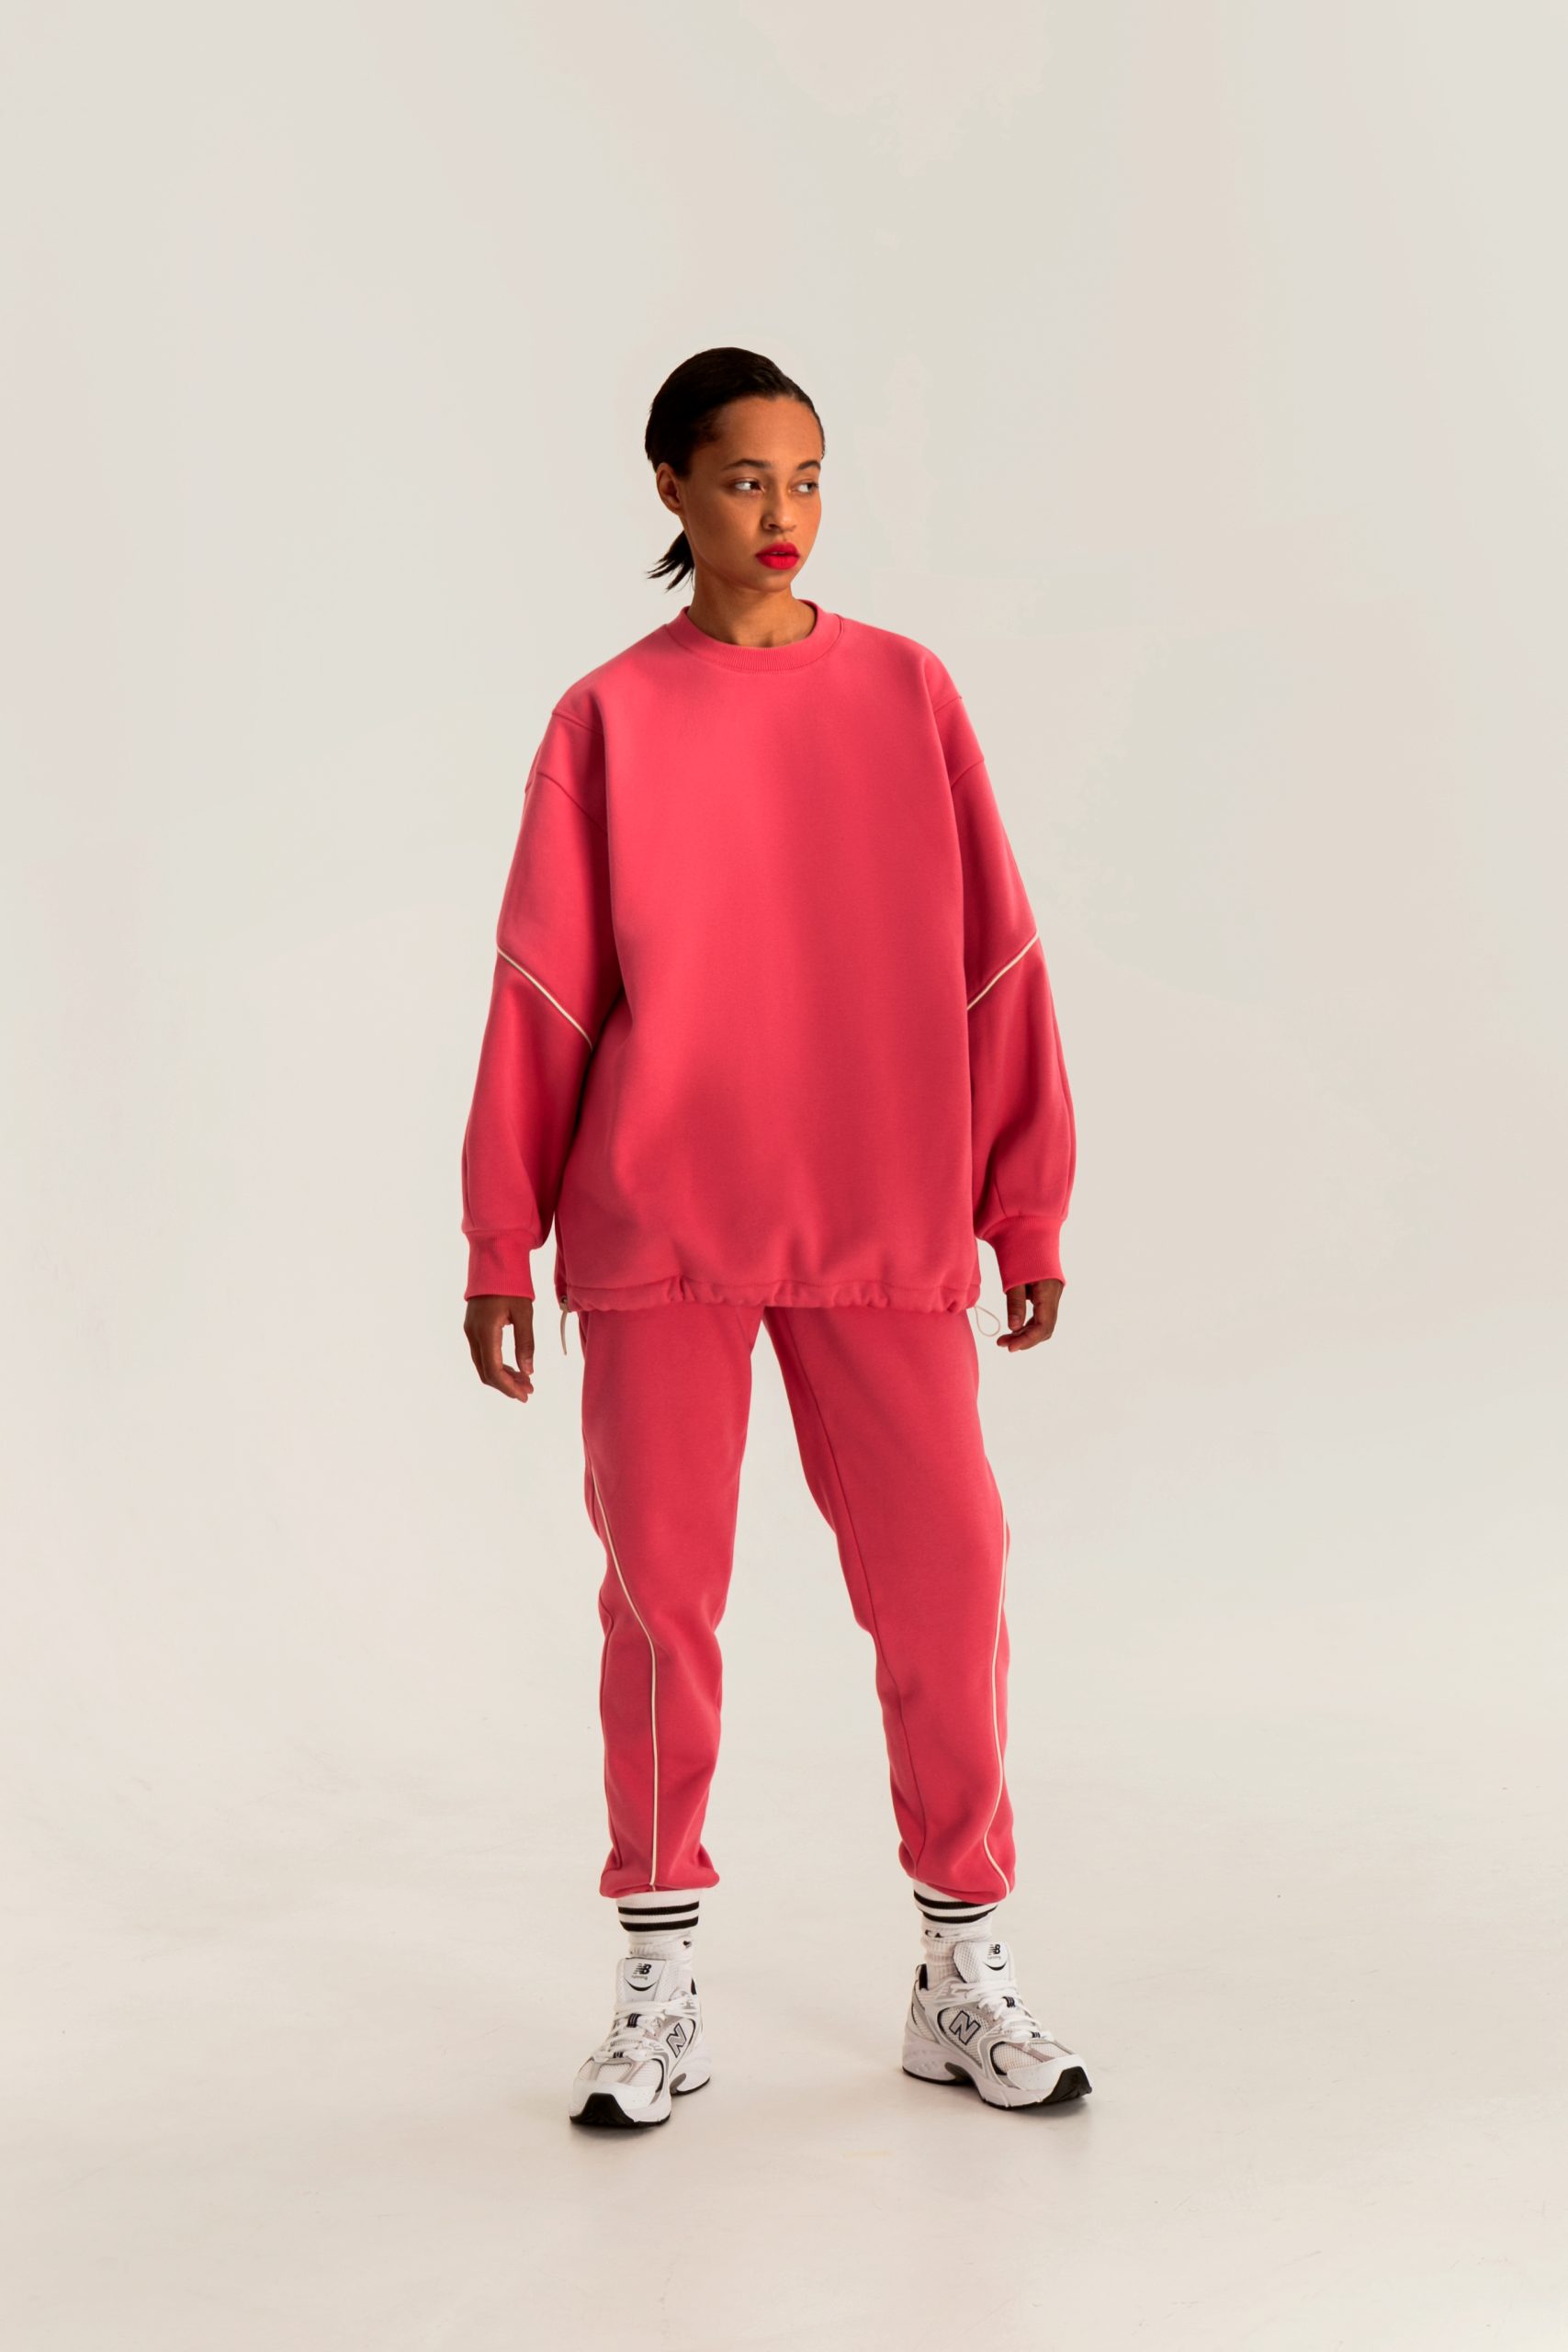 Woman wearing the Roxy Sweatshirt sewing pattern from Vikisews on The Fold Line. A sweatshirt pattern made in heavyweight sweatshirt fleece fabrics, featuring an oversized straight silhouette, shoulder darts, round neckline with ribbed neckband, full-length sleeves with ribbed cuffs, below-hip length, the hem has an elastic cord and toggle stoppers.